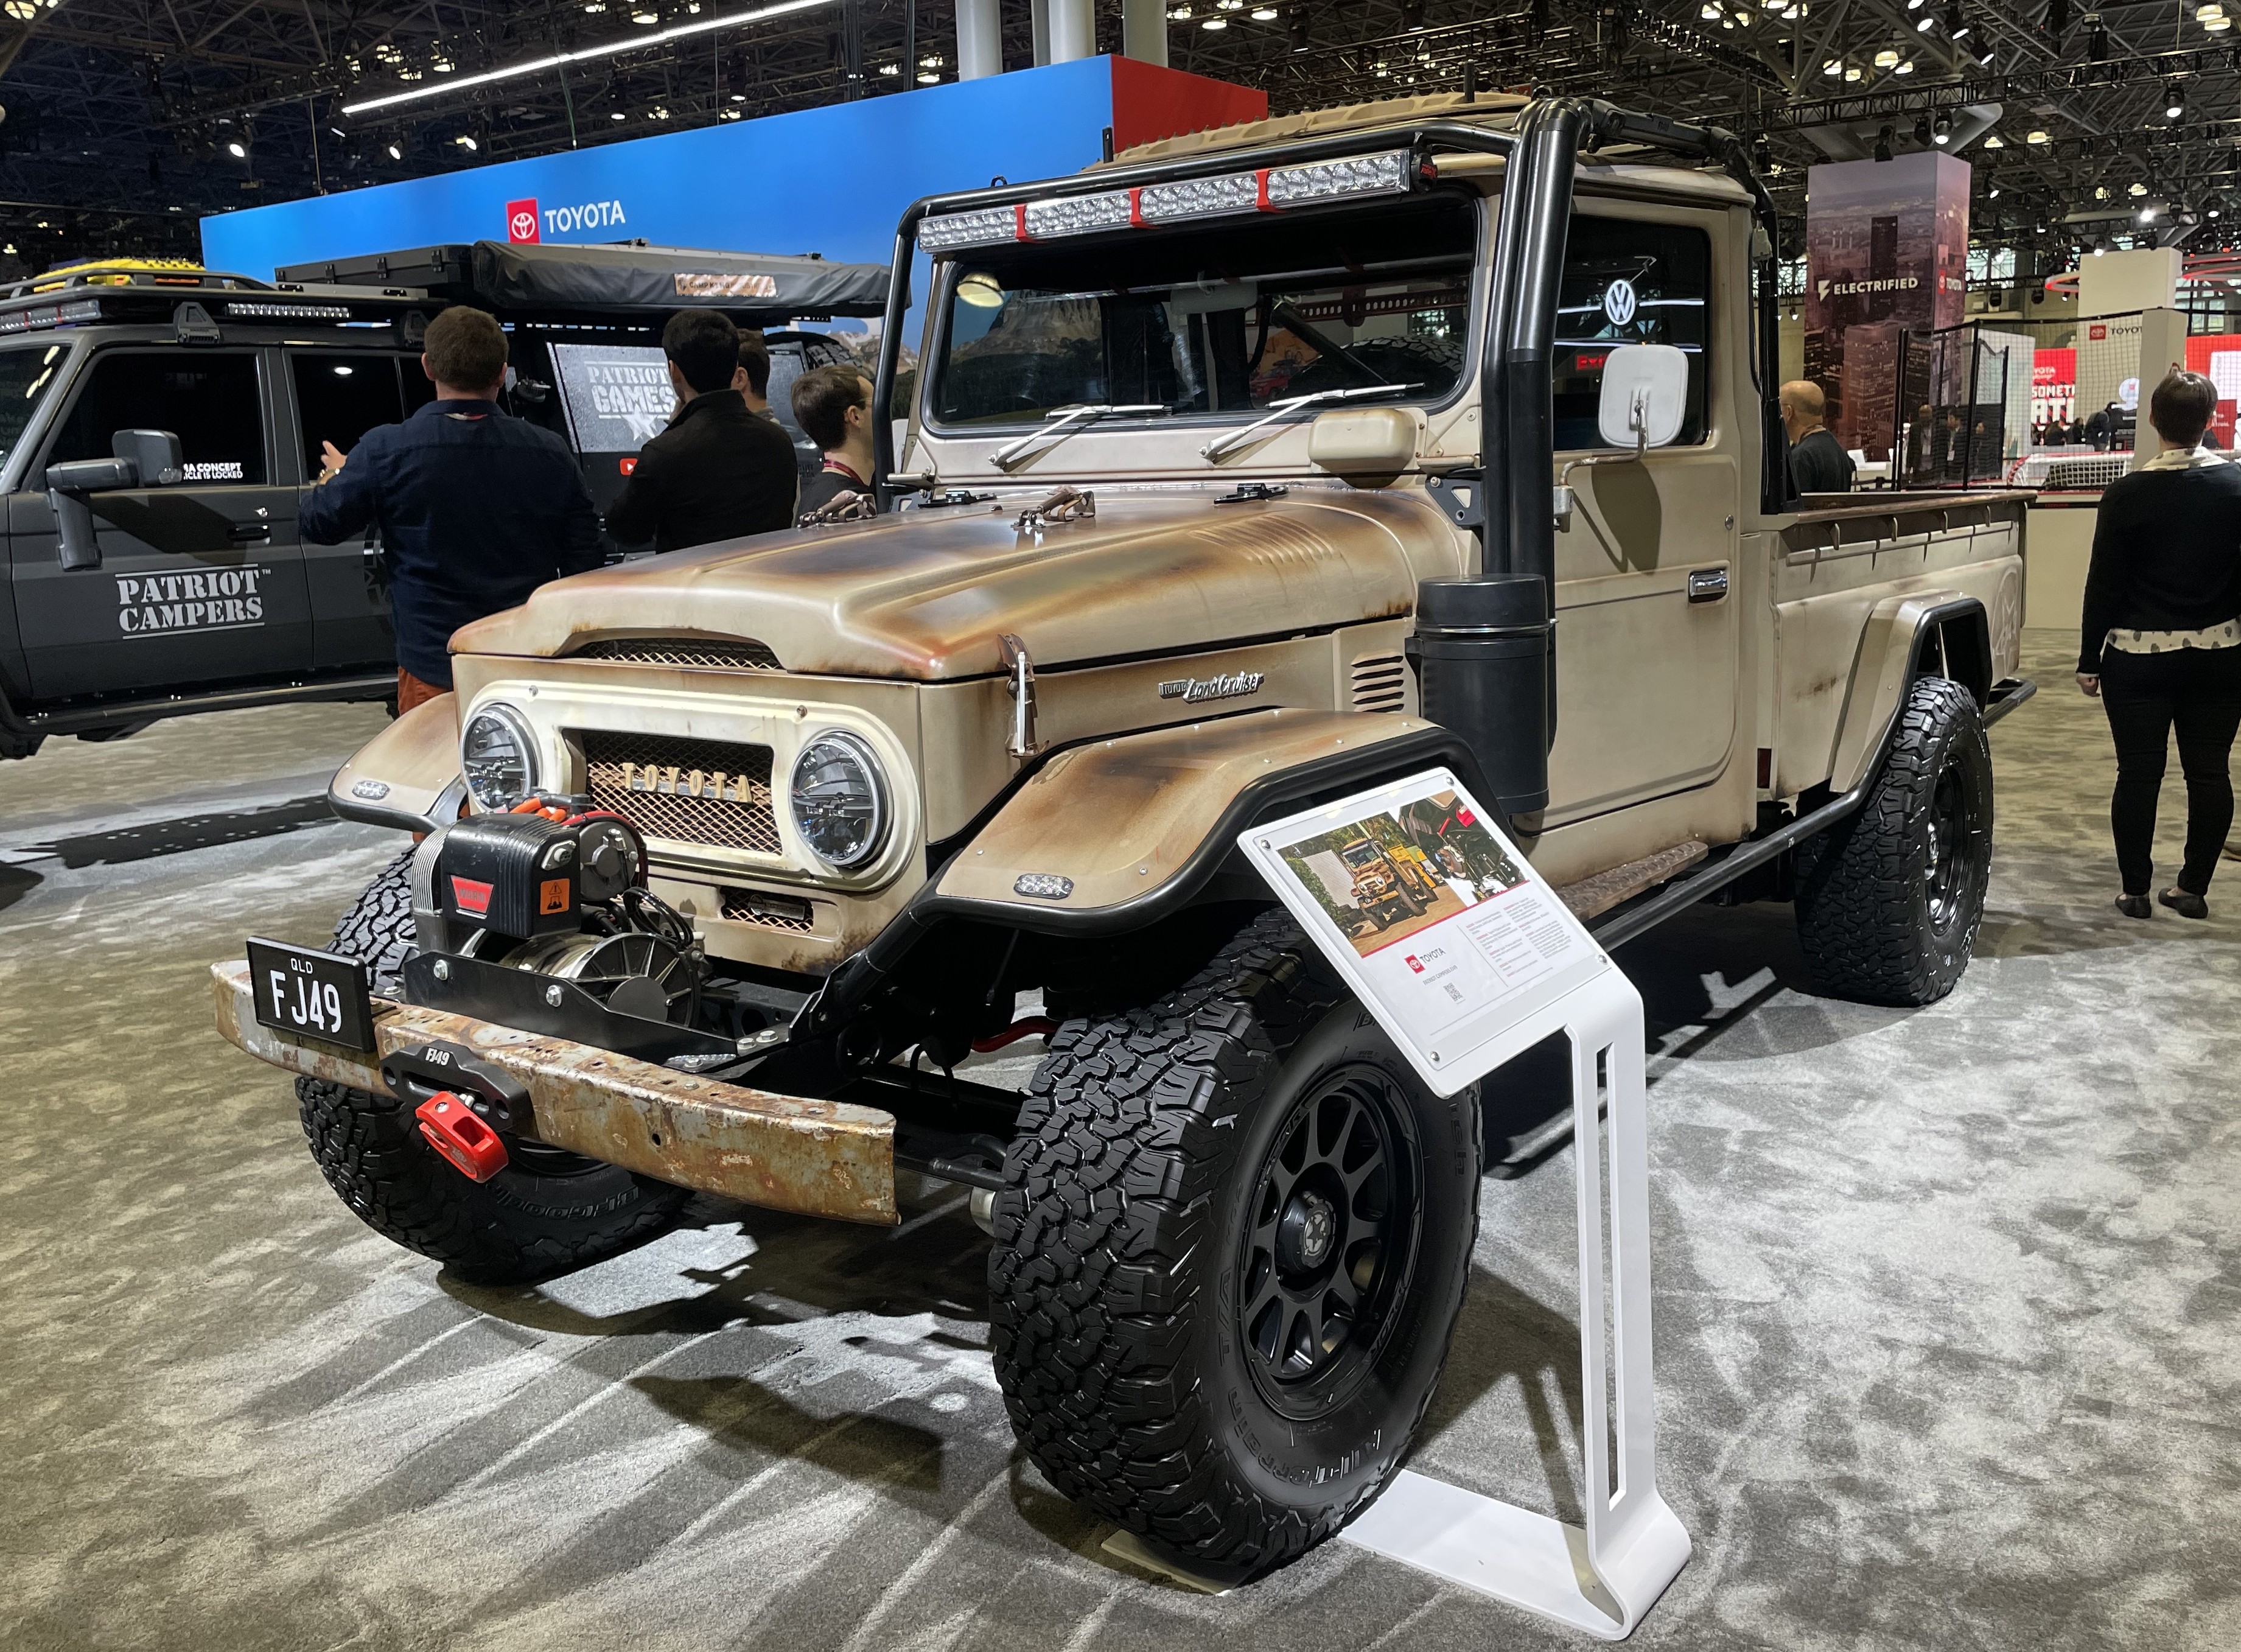 Vintage Japanese Vehicles Grab the Spotlight at the New York International Auto Show